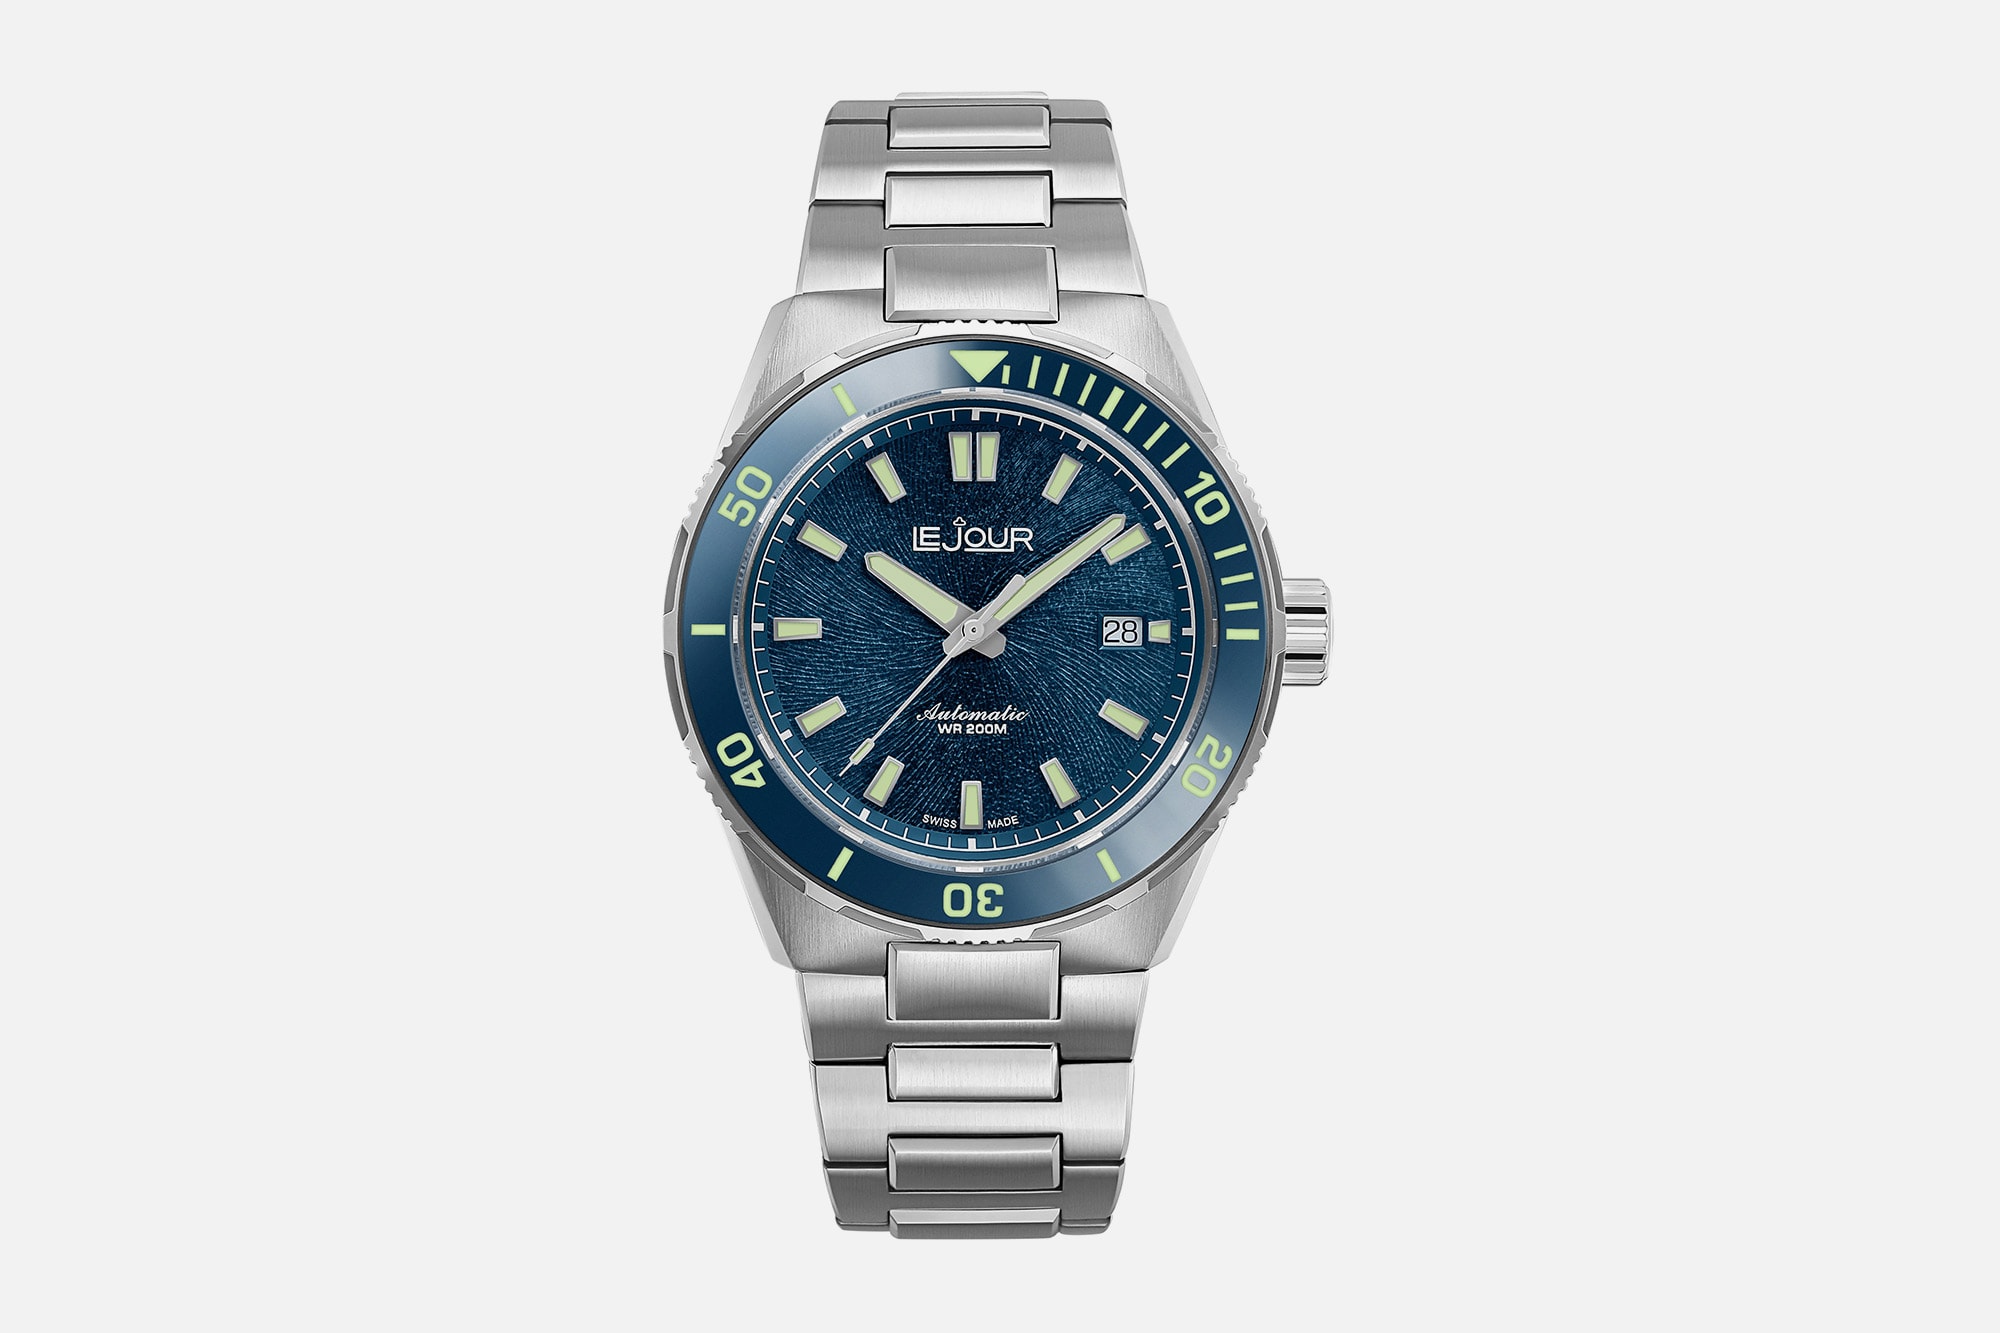 Introducing the Le Jour Coral Diver